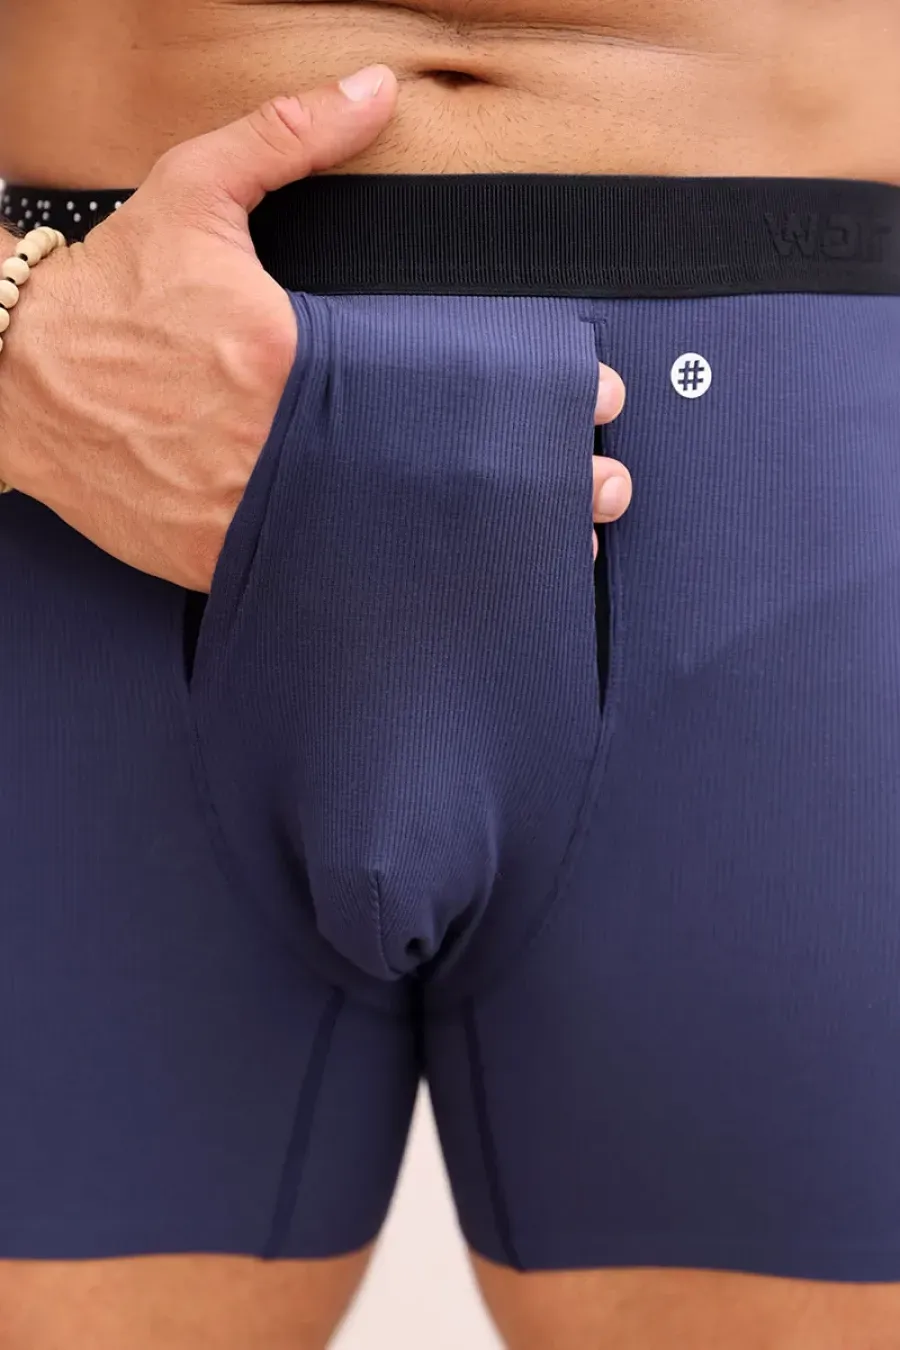 Источник: https://mikeshouts.com/wair-ambifly-ambidextrous-boxer-brief/